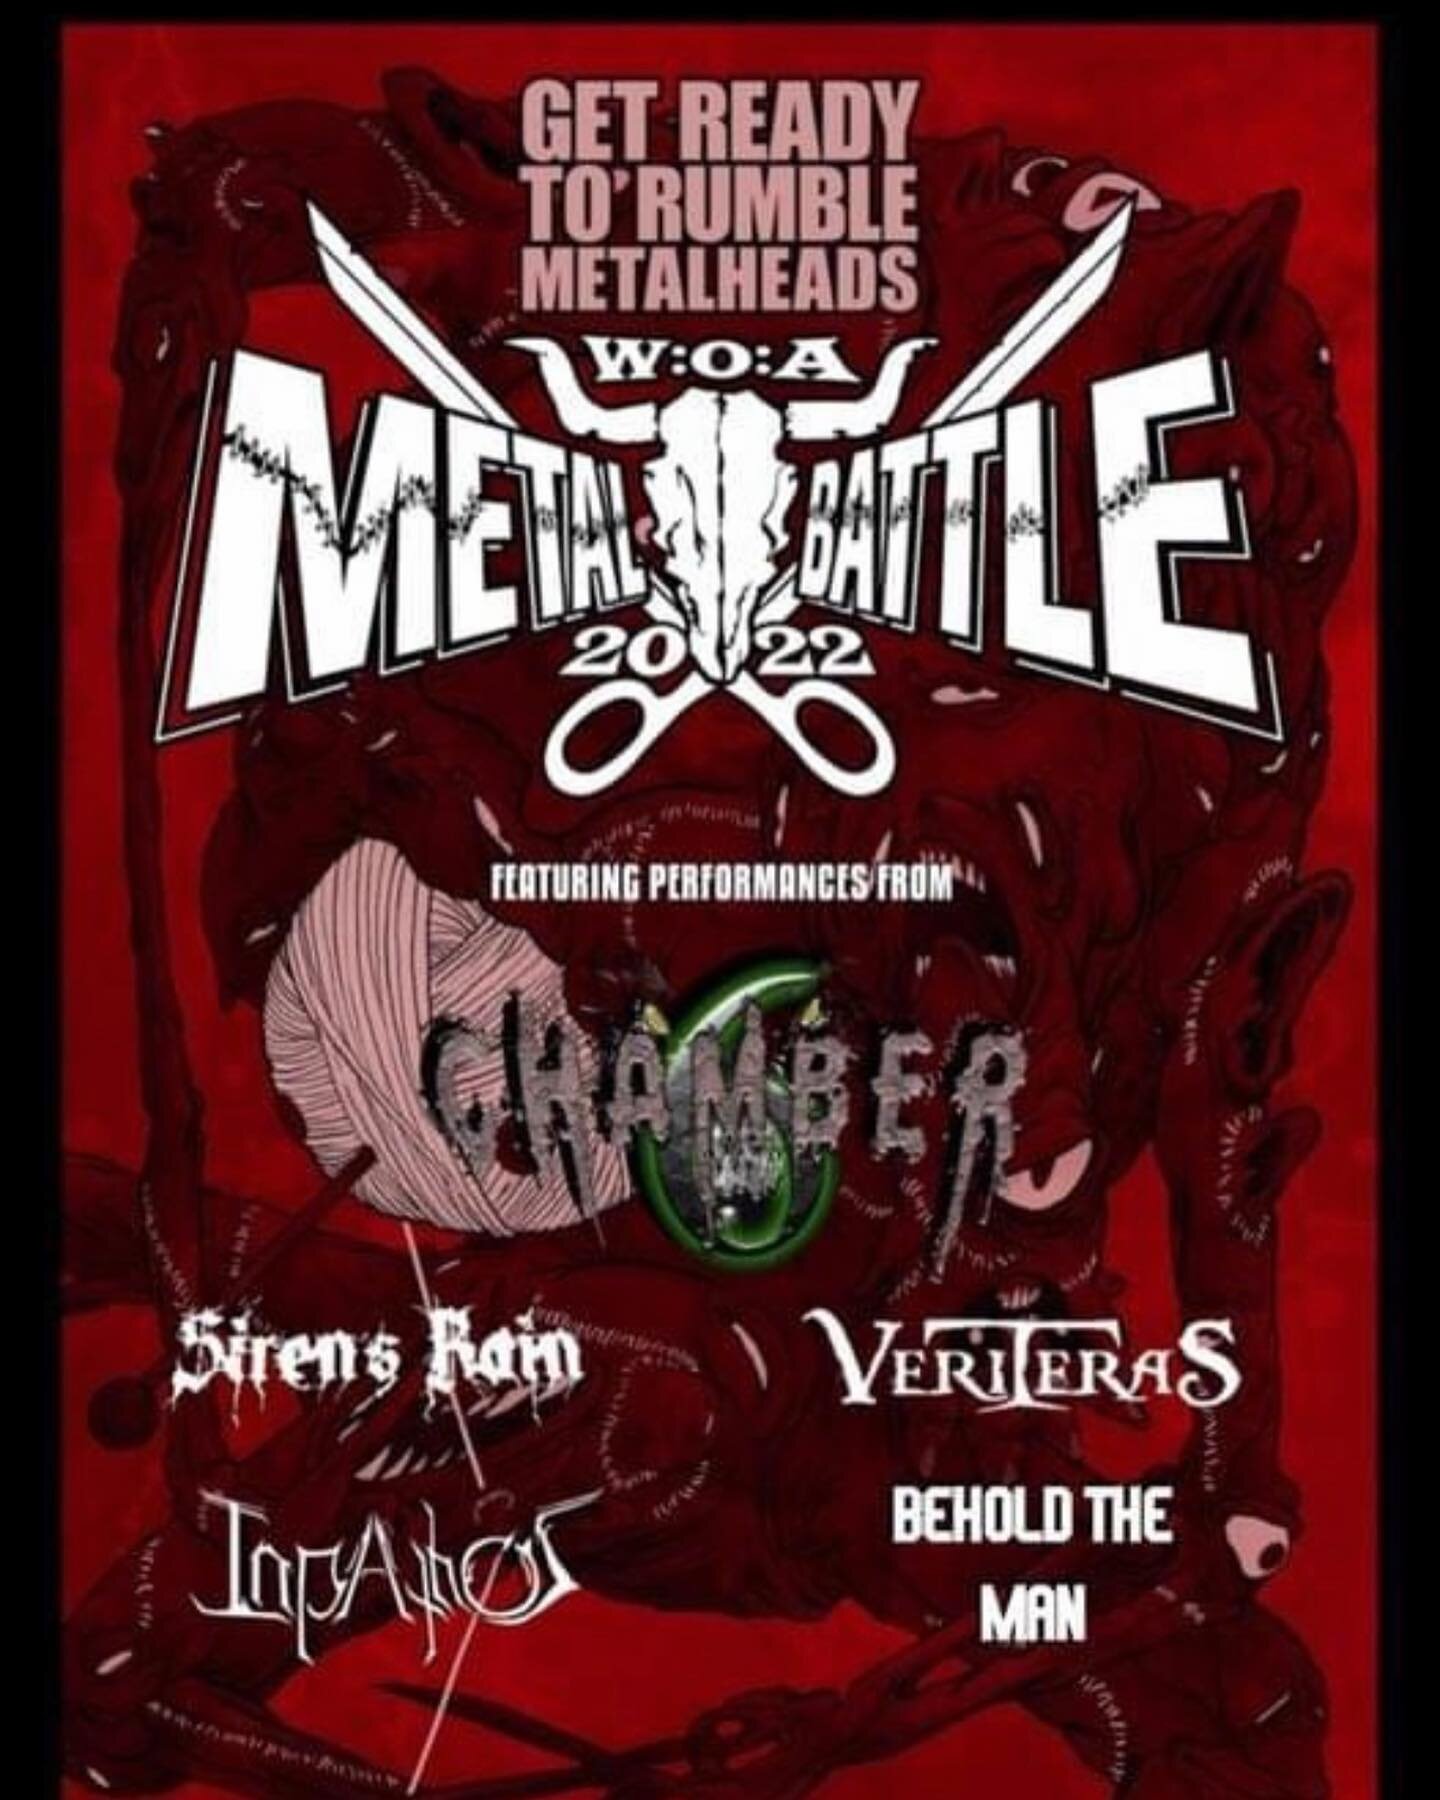 🔥SHOW ANNOUNCEMENT🔥

Inpathos are beyond excited to officially announce that we&rsquo;ll be playing @metalbattleusa this year at @funhouseseattle 

Come root for yours truly on Saturday February 12th - 7:00 PM
21+ at The Funhouse in Seattle

🎫Link